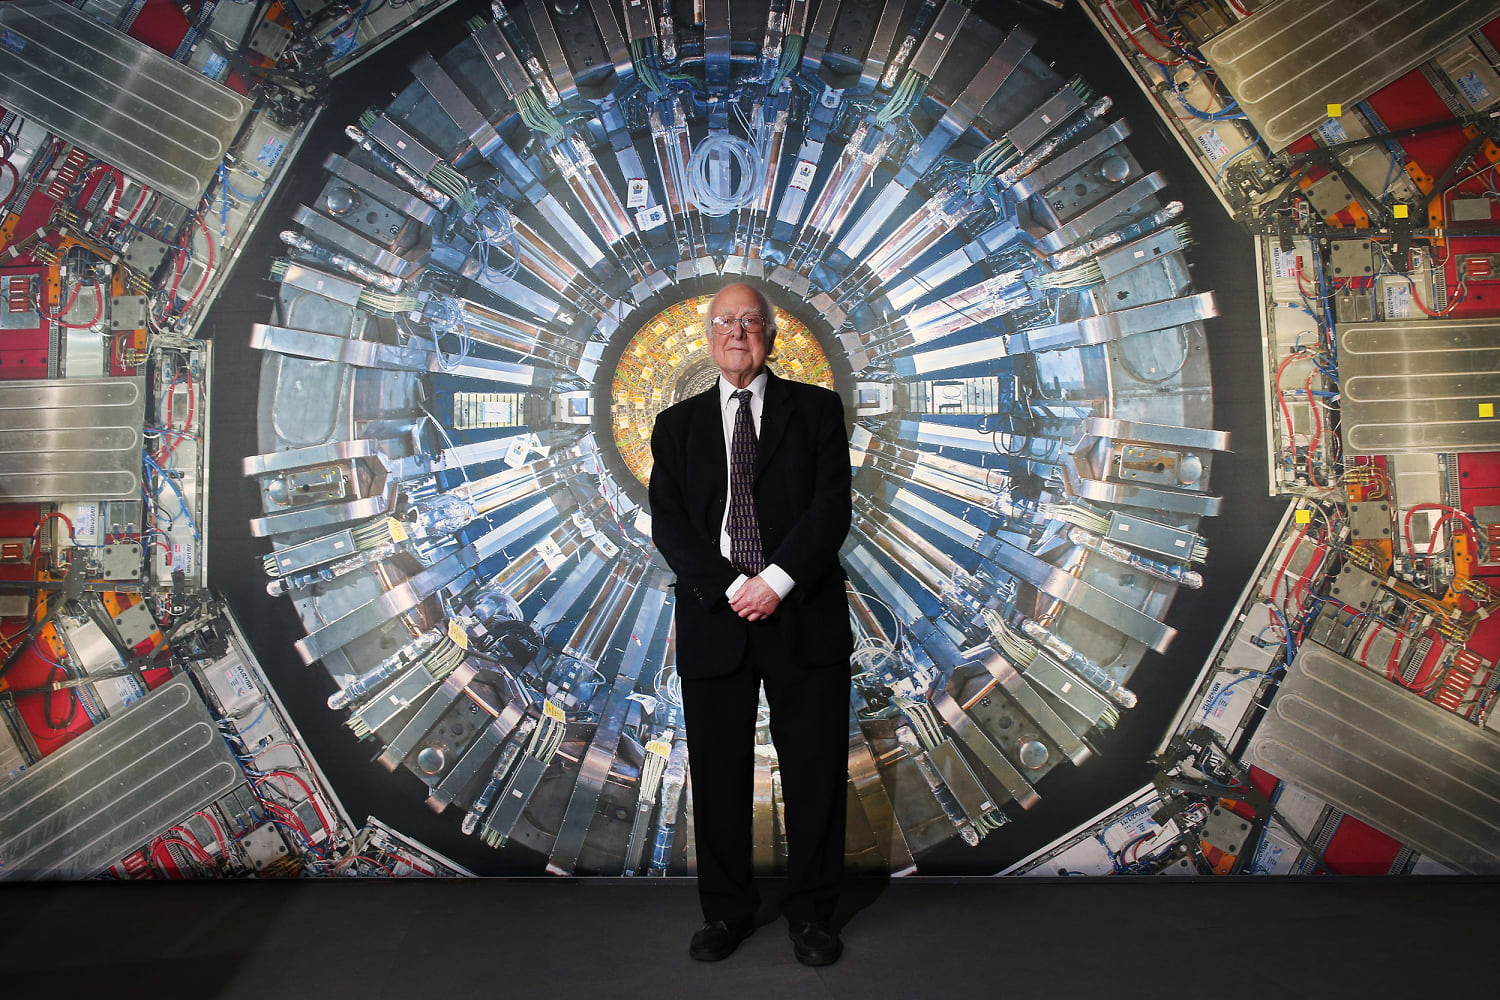 Peter Higgs, who proposed the existence of the 'God particle' has died at 94